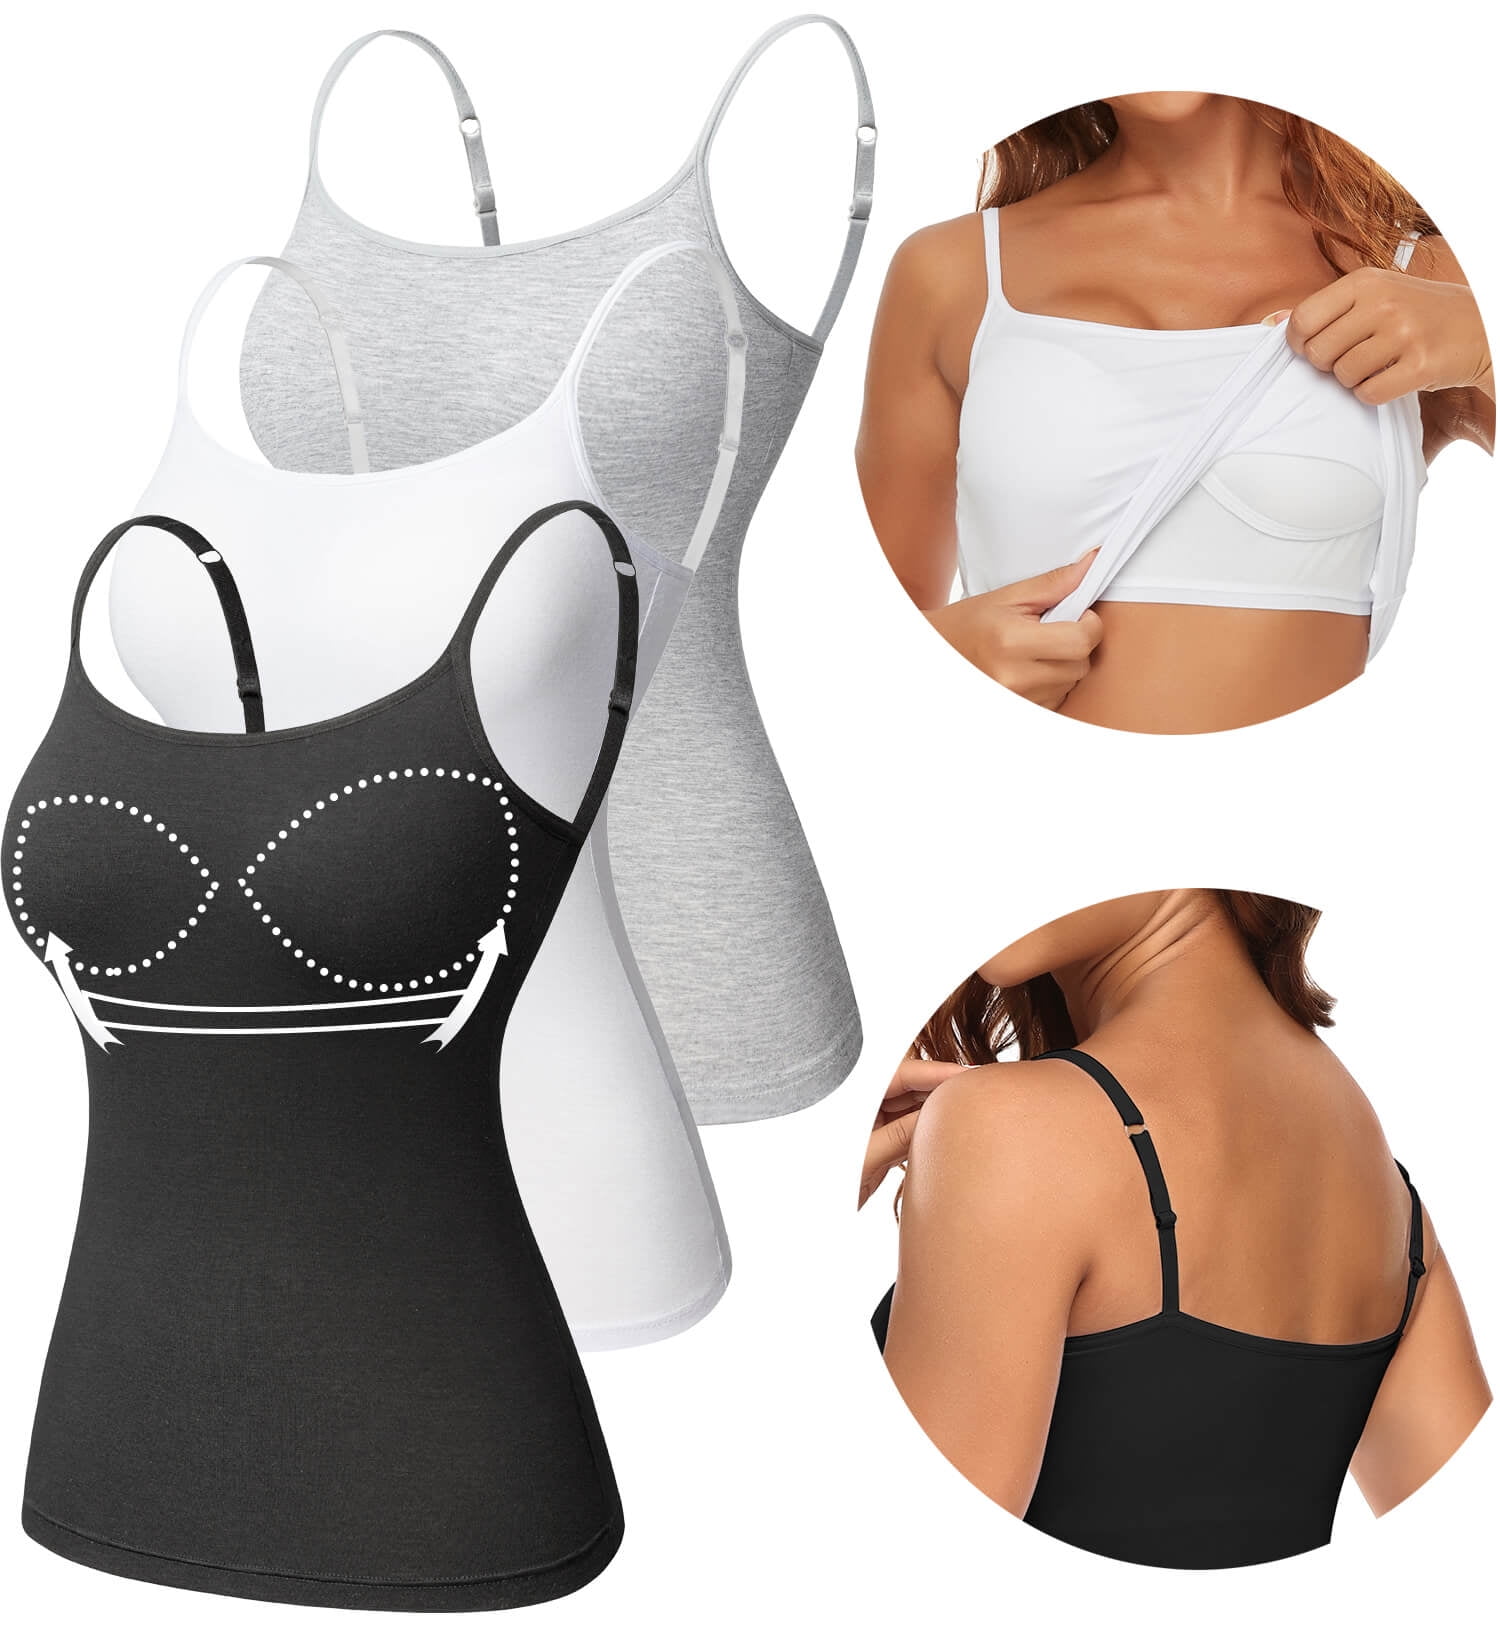 MANIFIQUE 3 Pack Women's Camisole with Built-in Padded Bra